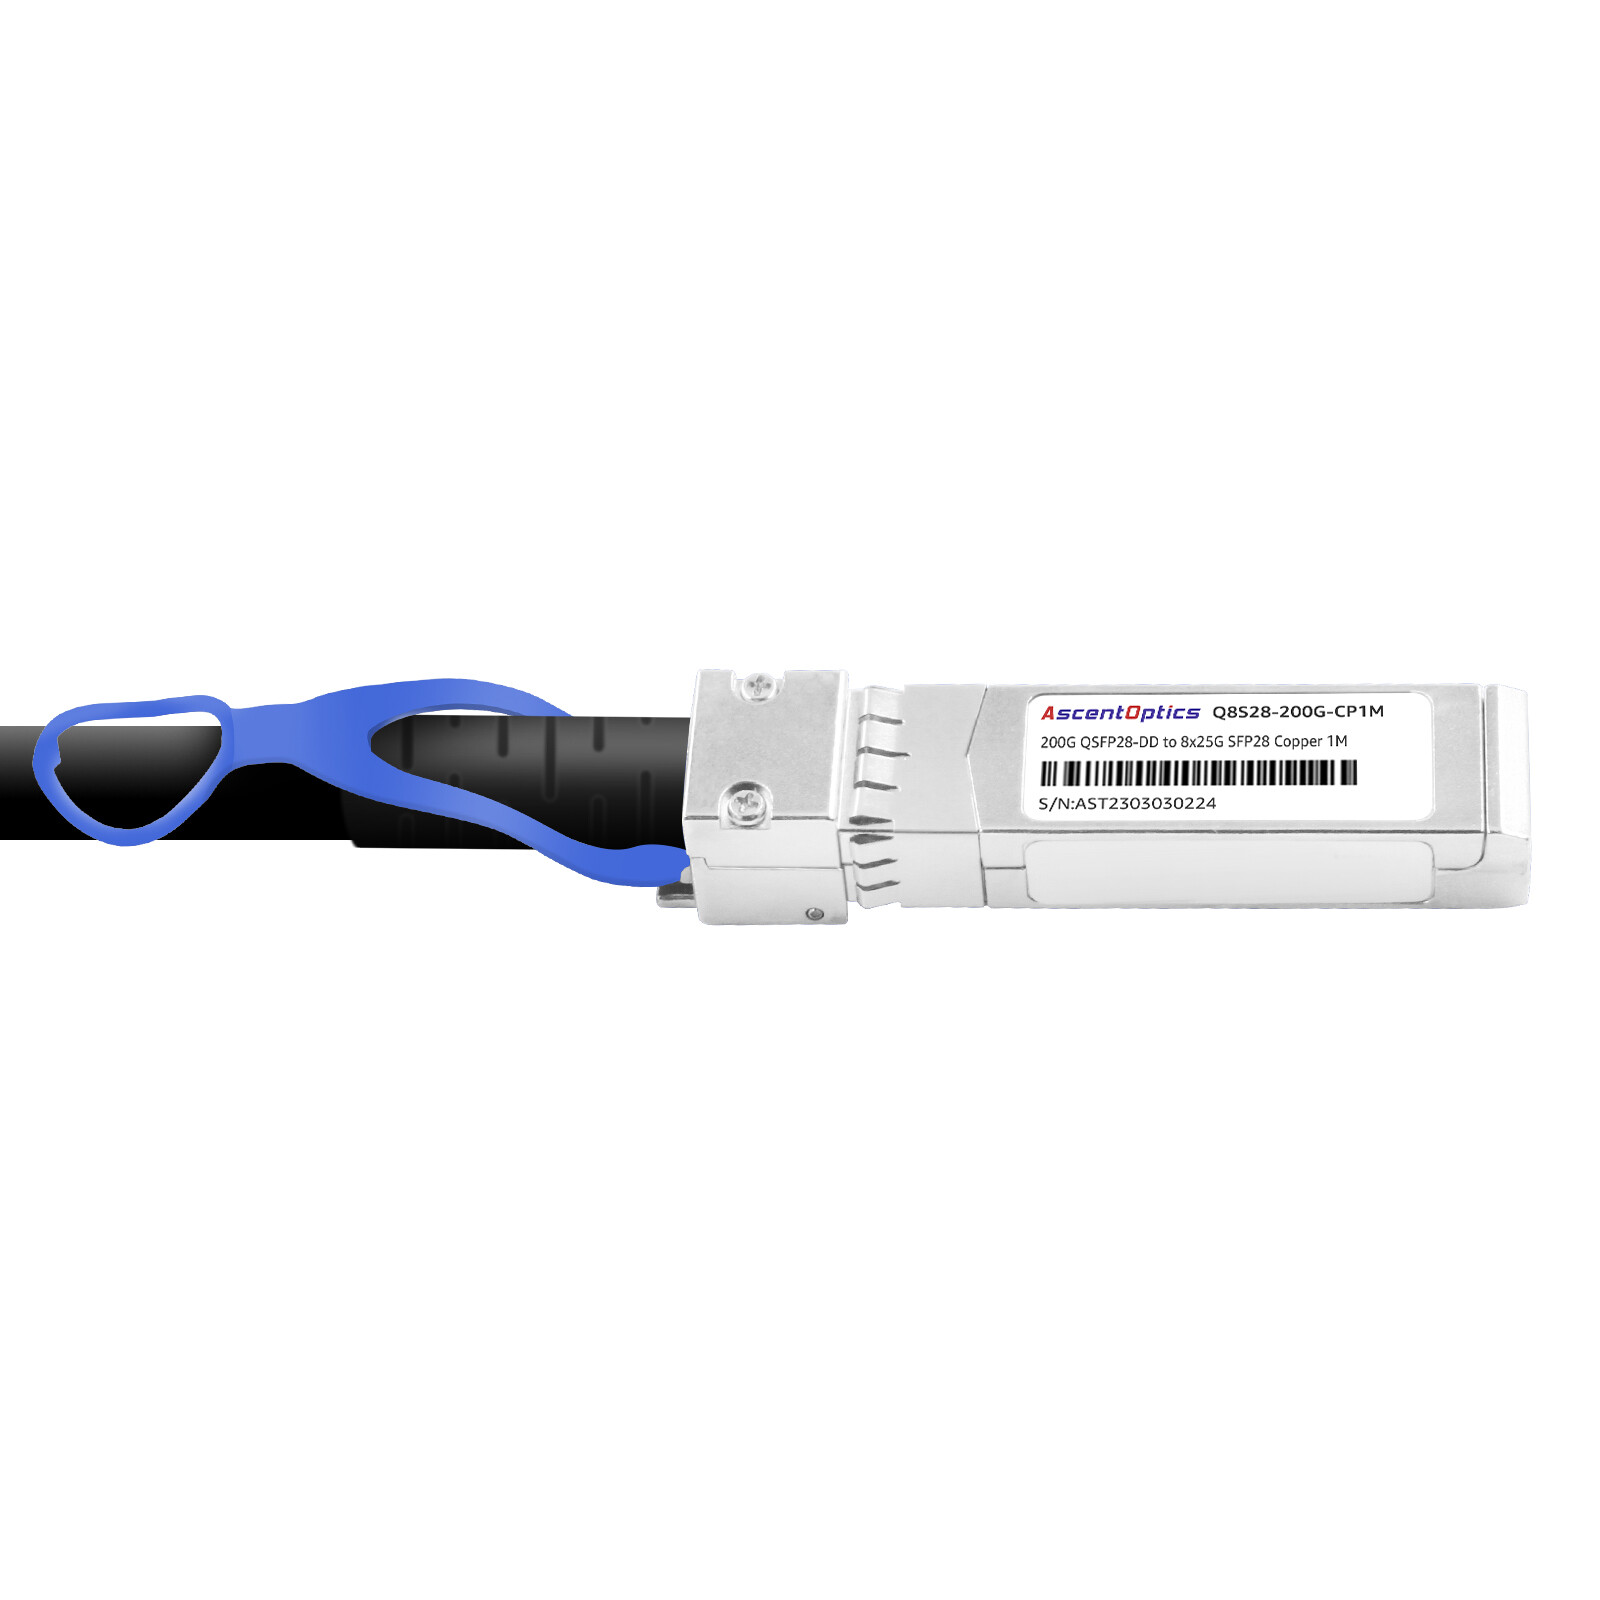 200G QSFP28-DD to 8x 25G SFP28 Copper Breakout Cable,1 Meter,Passive